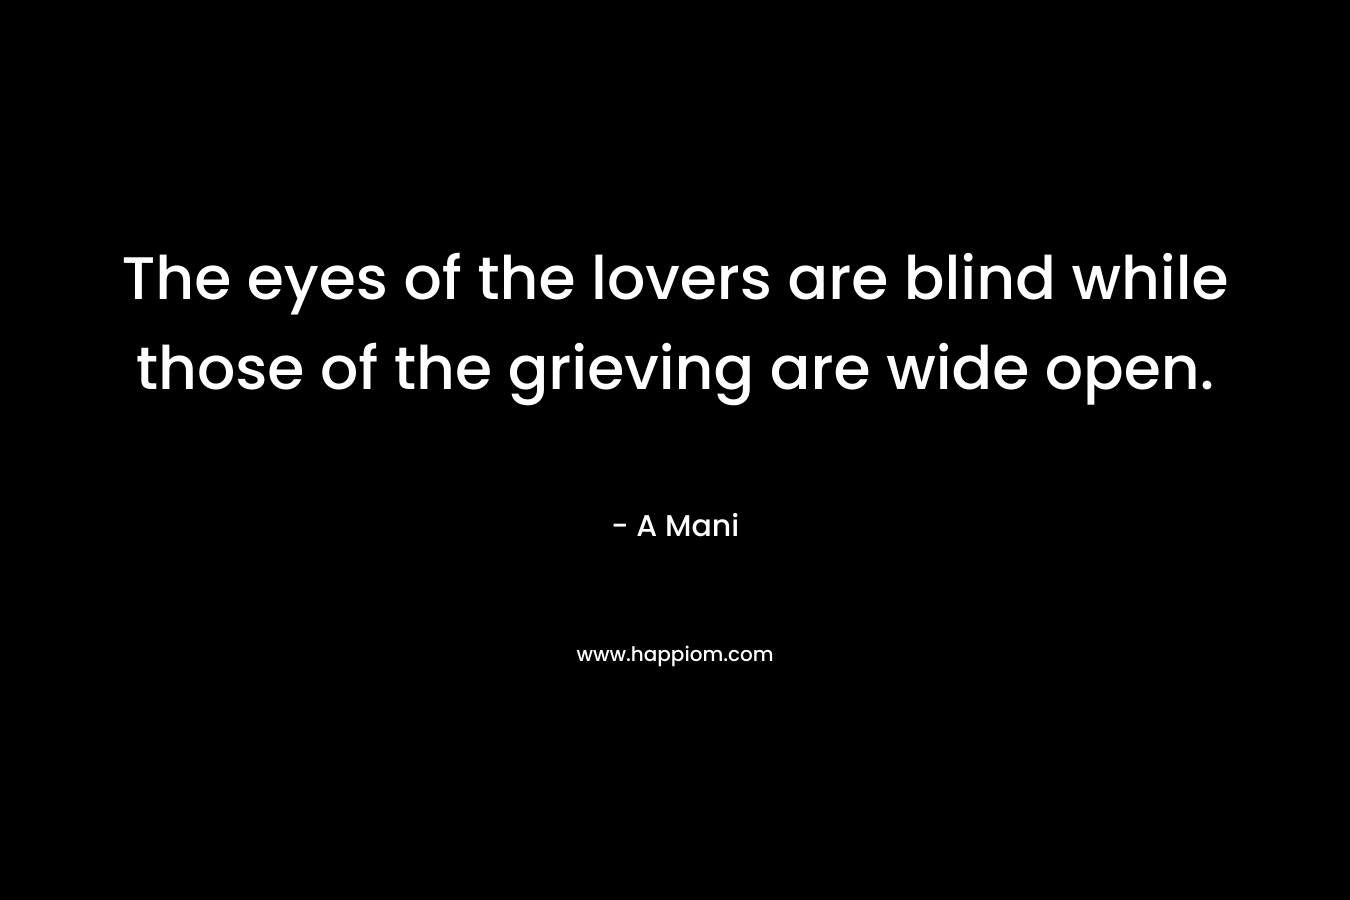 The eyes of the lovers are blind while those of the grieving are wide open.